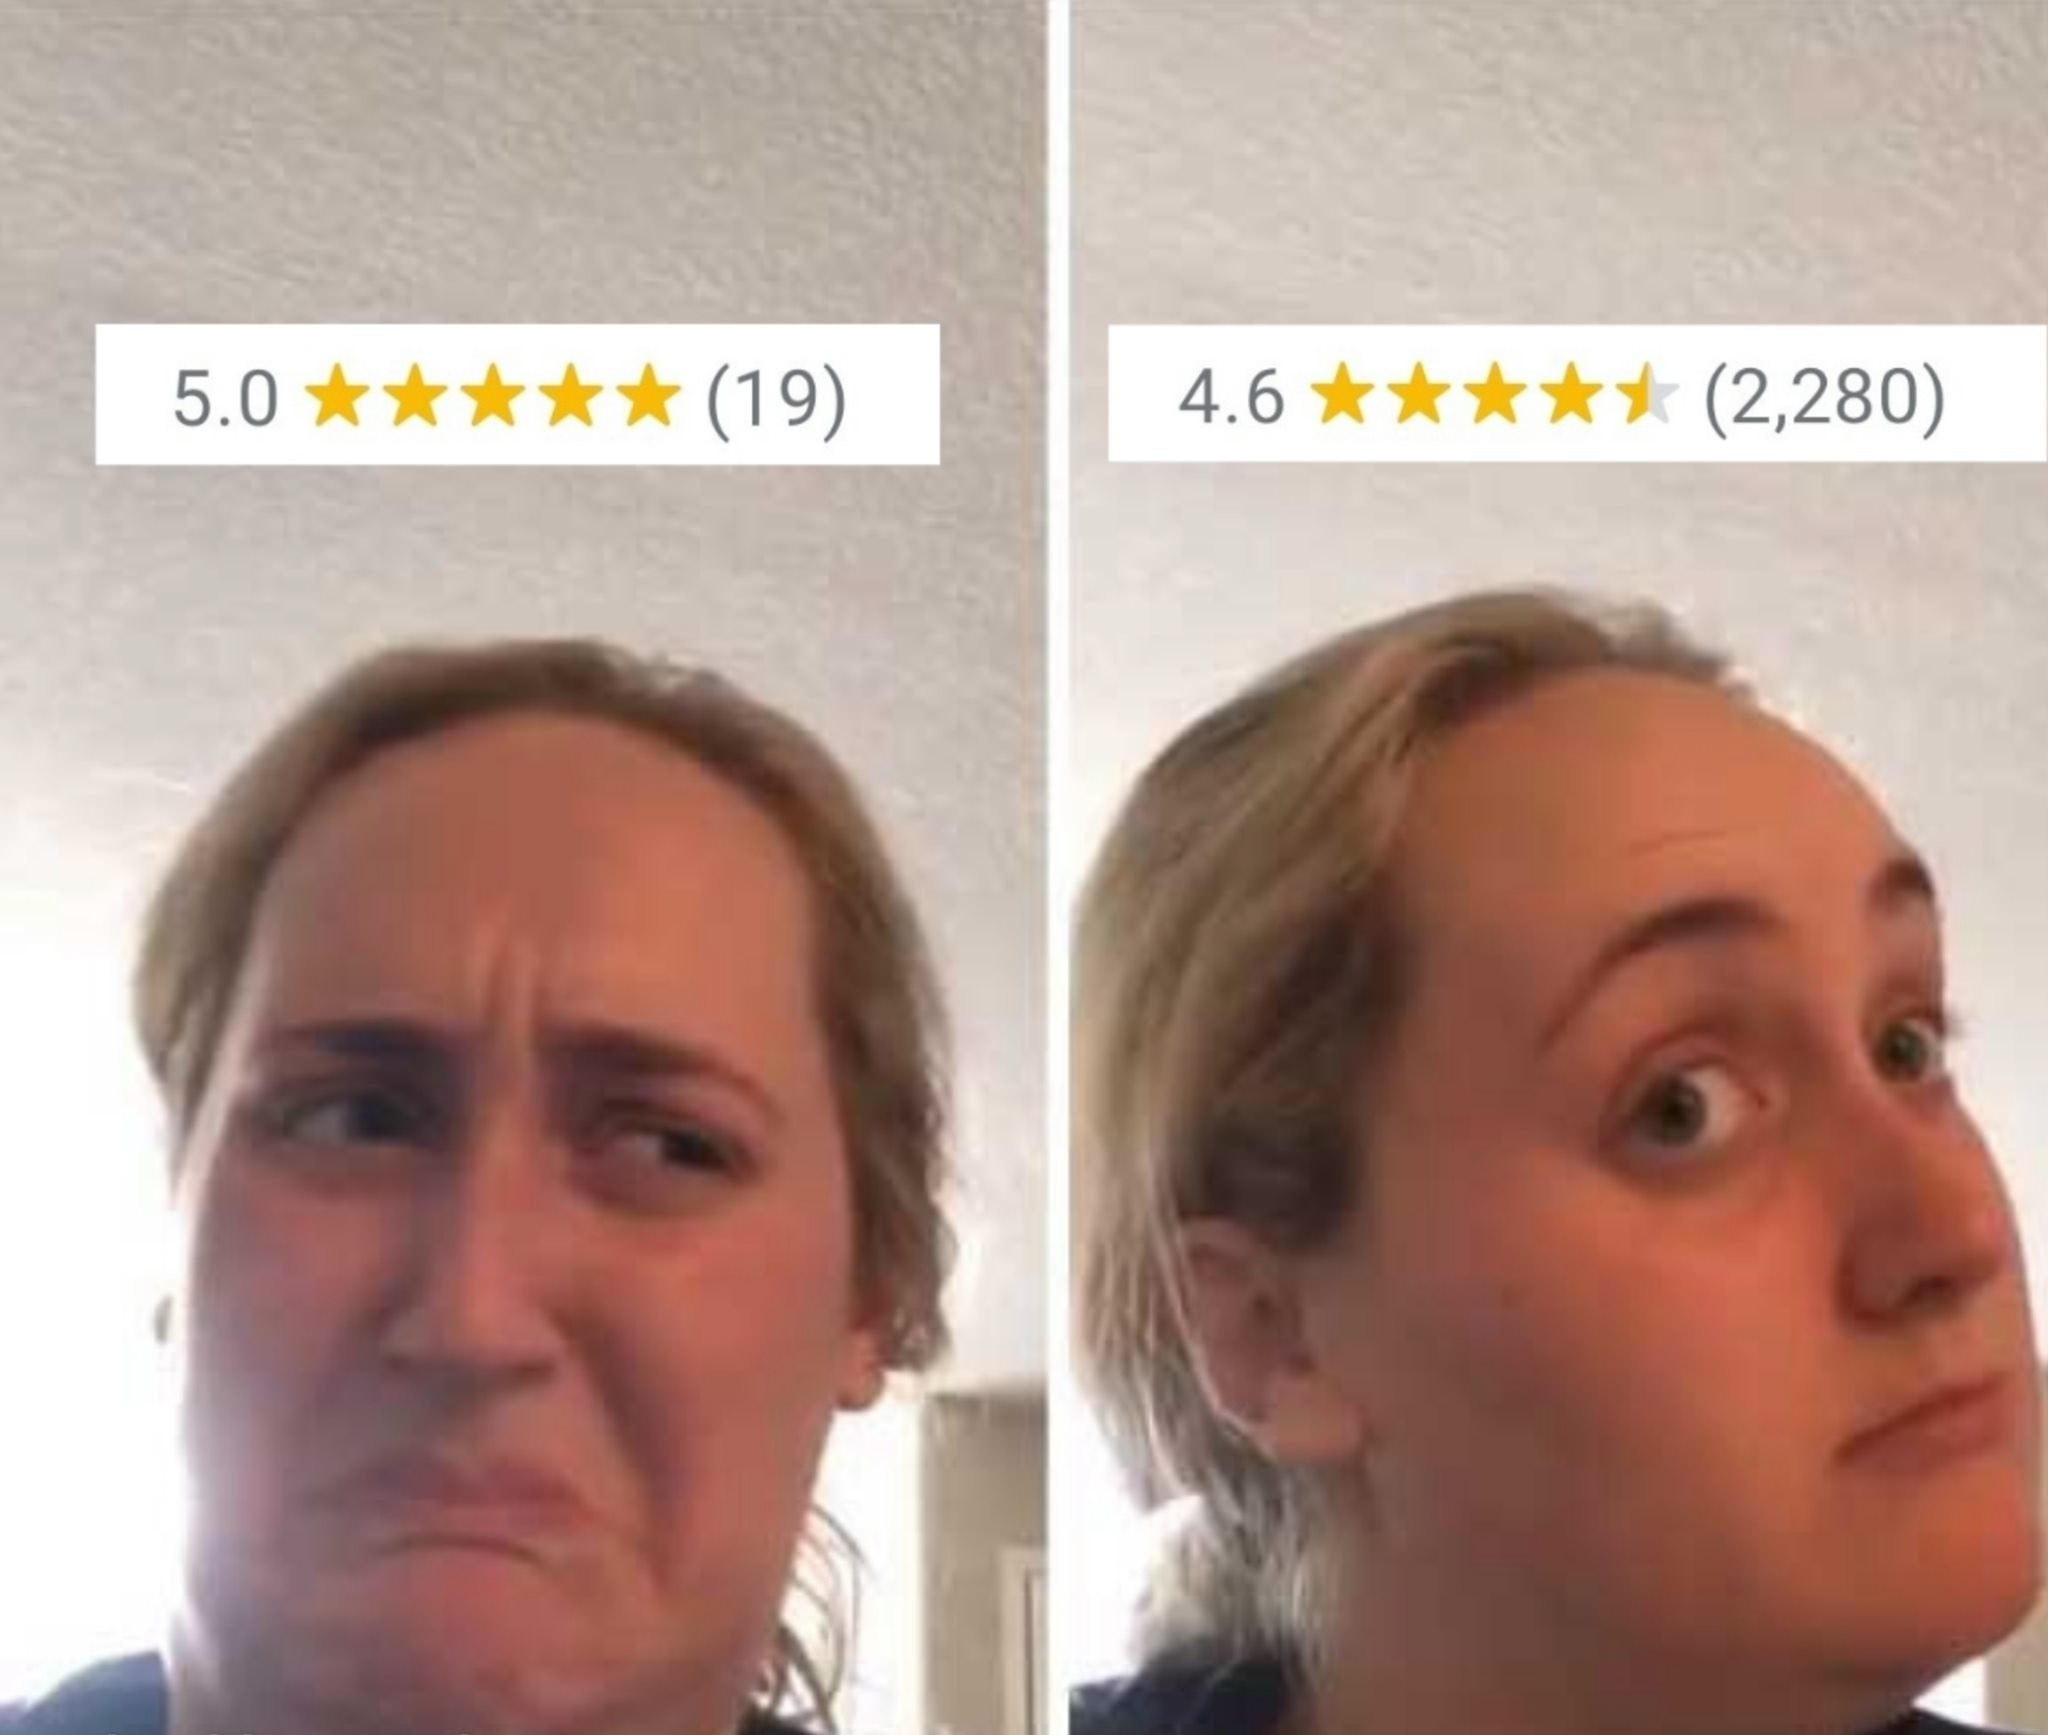 person not sold on 19 5 star reviews but sold on hundreds of 4 star reviews